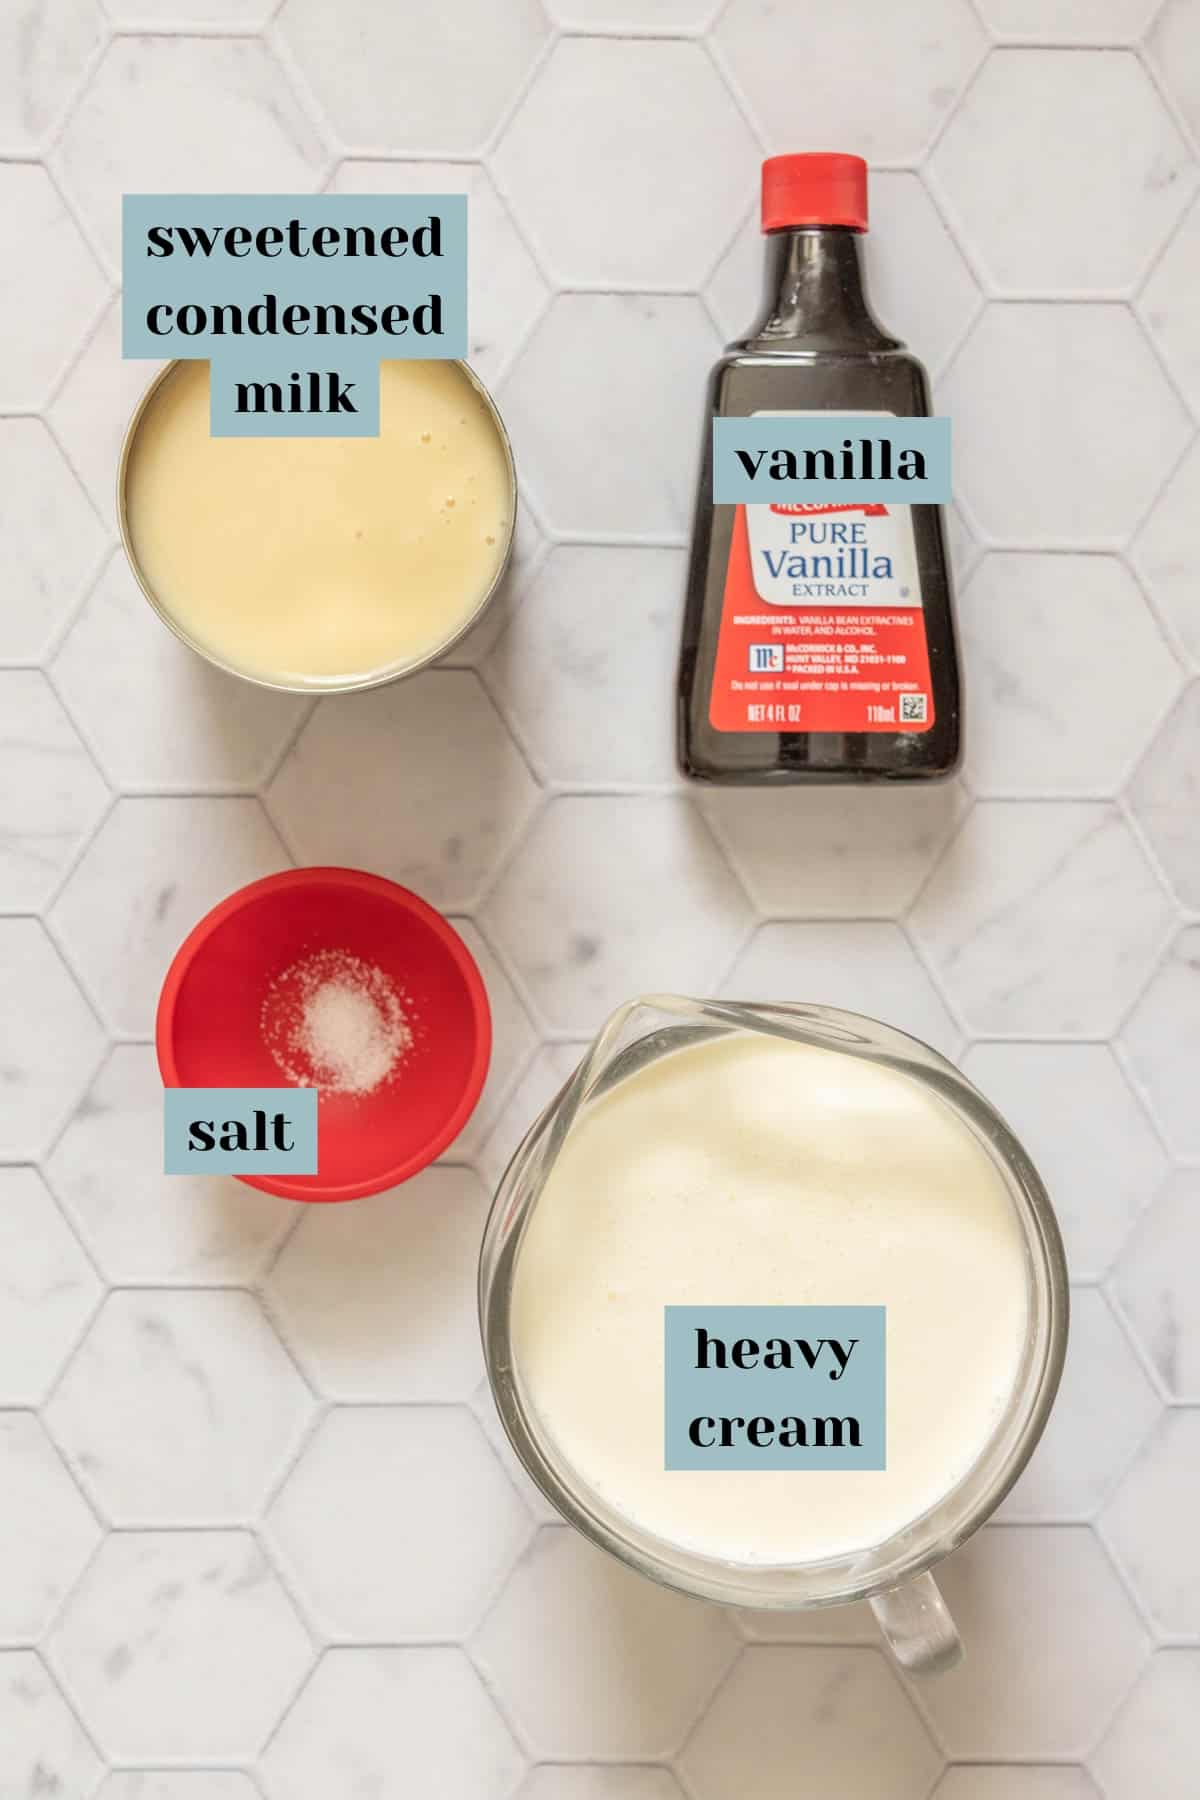 Ingredients for no-churn ice cream on a tile surface with labels.